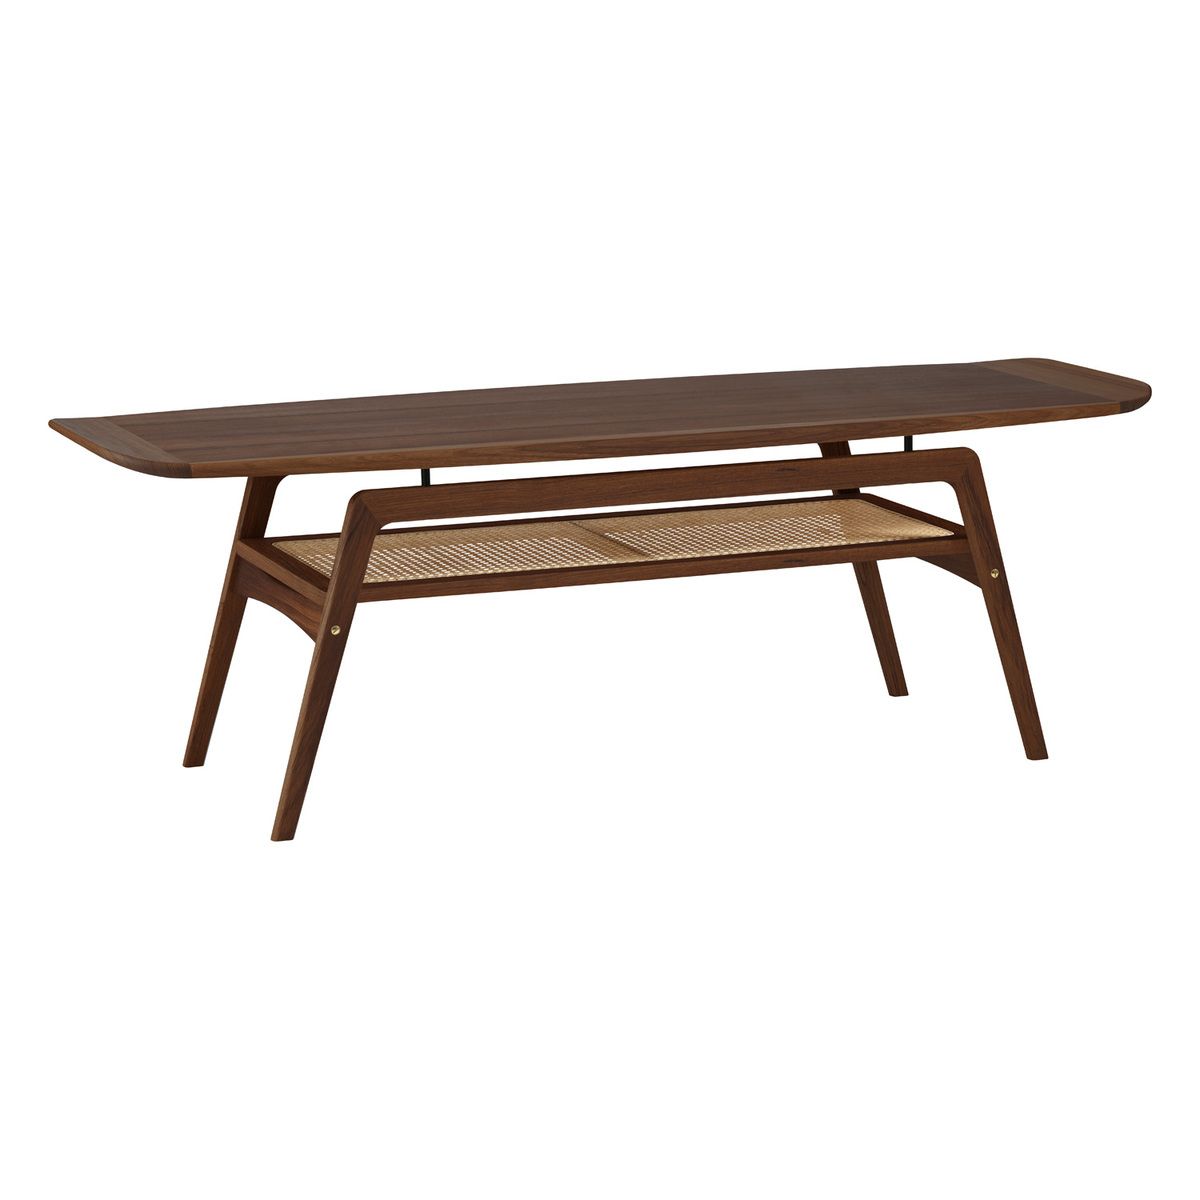 Surfboard Coffee Table With Shelf, Walnut – French Cane | Finnish Design  Shop Intended For Warm Walnut Coffee Tables (View 5 of 20)